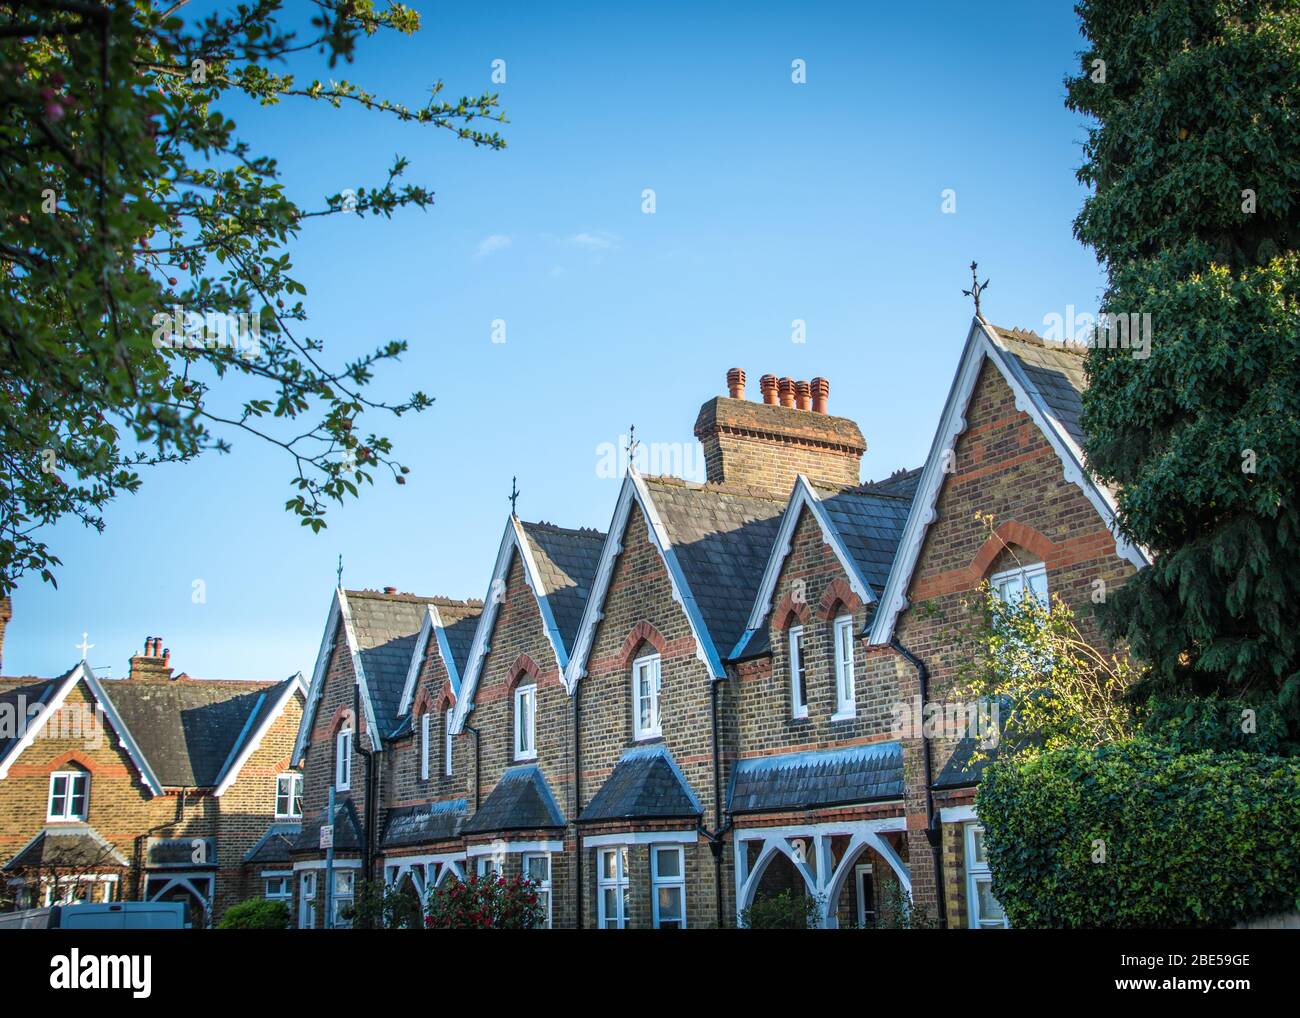 Street of houses in Wimbledon- south west London - UK Stock Photo